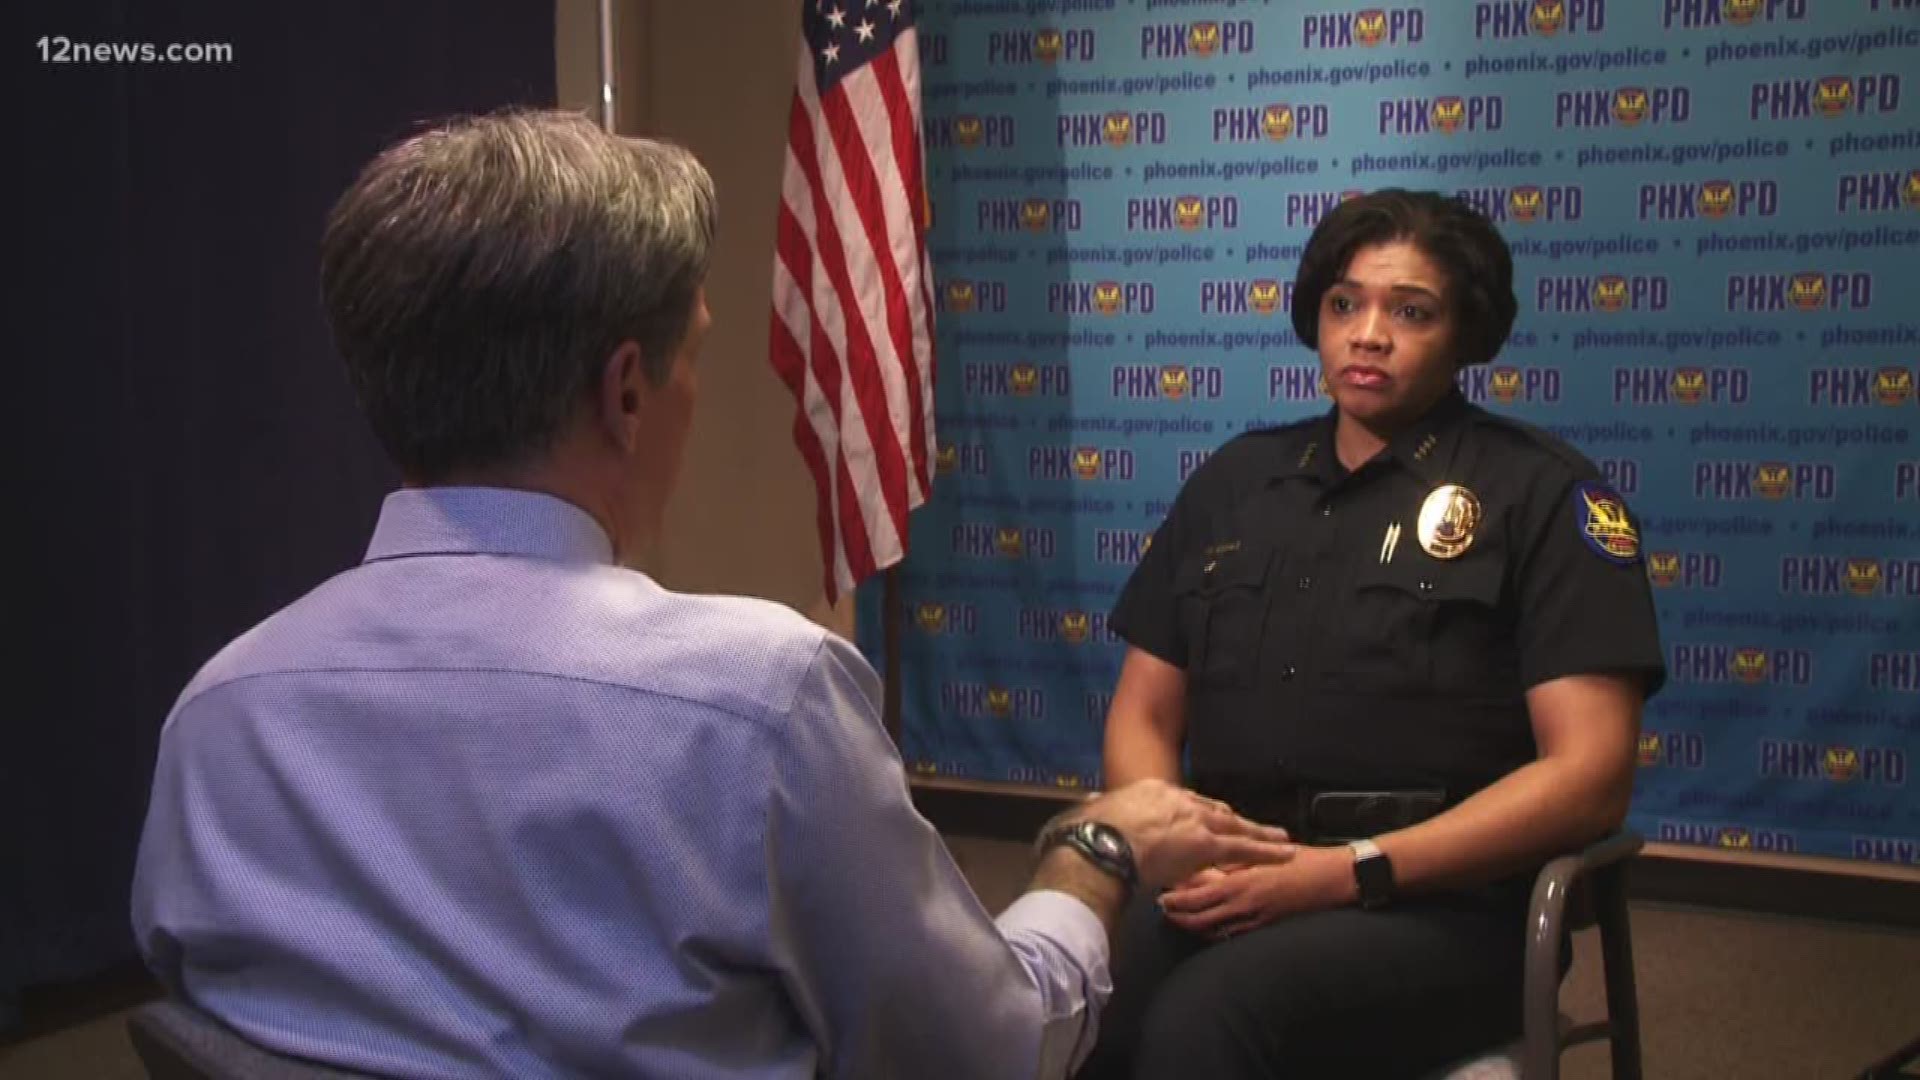 In an exclusive interview with 12 News, Phoenix Police Chief Jeri Williams said Friday the sharp rise in police shootings this year was the result of defiant suspects confronting her officers.